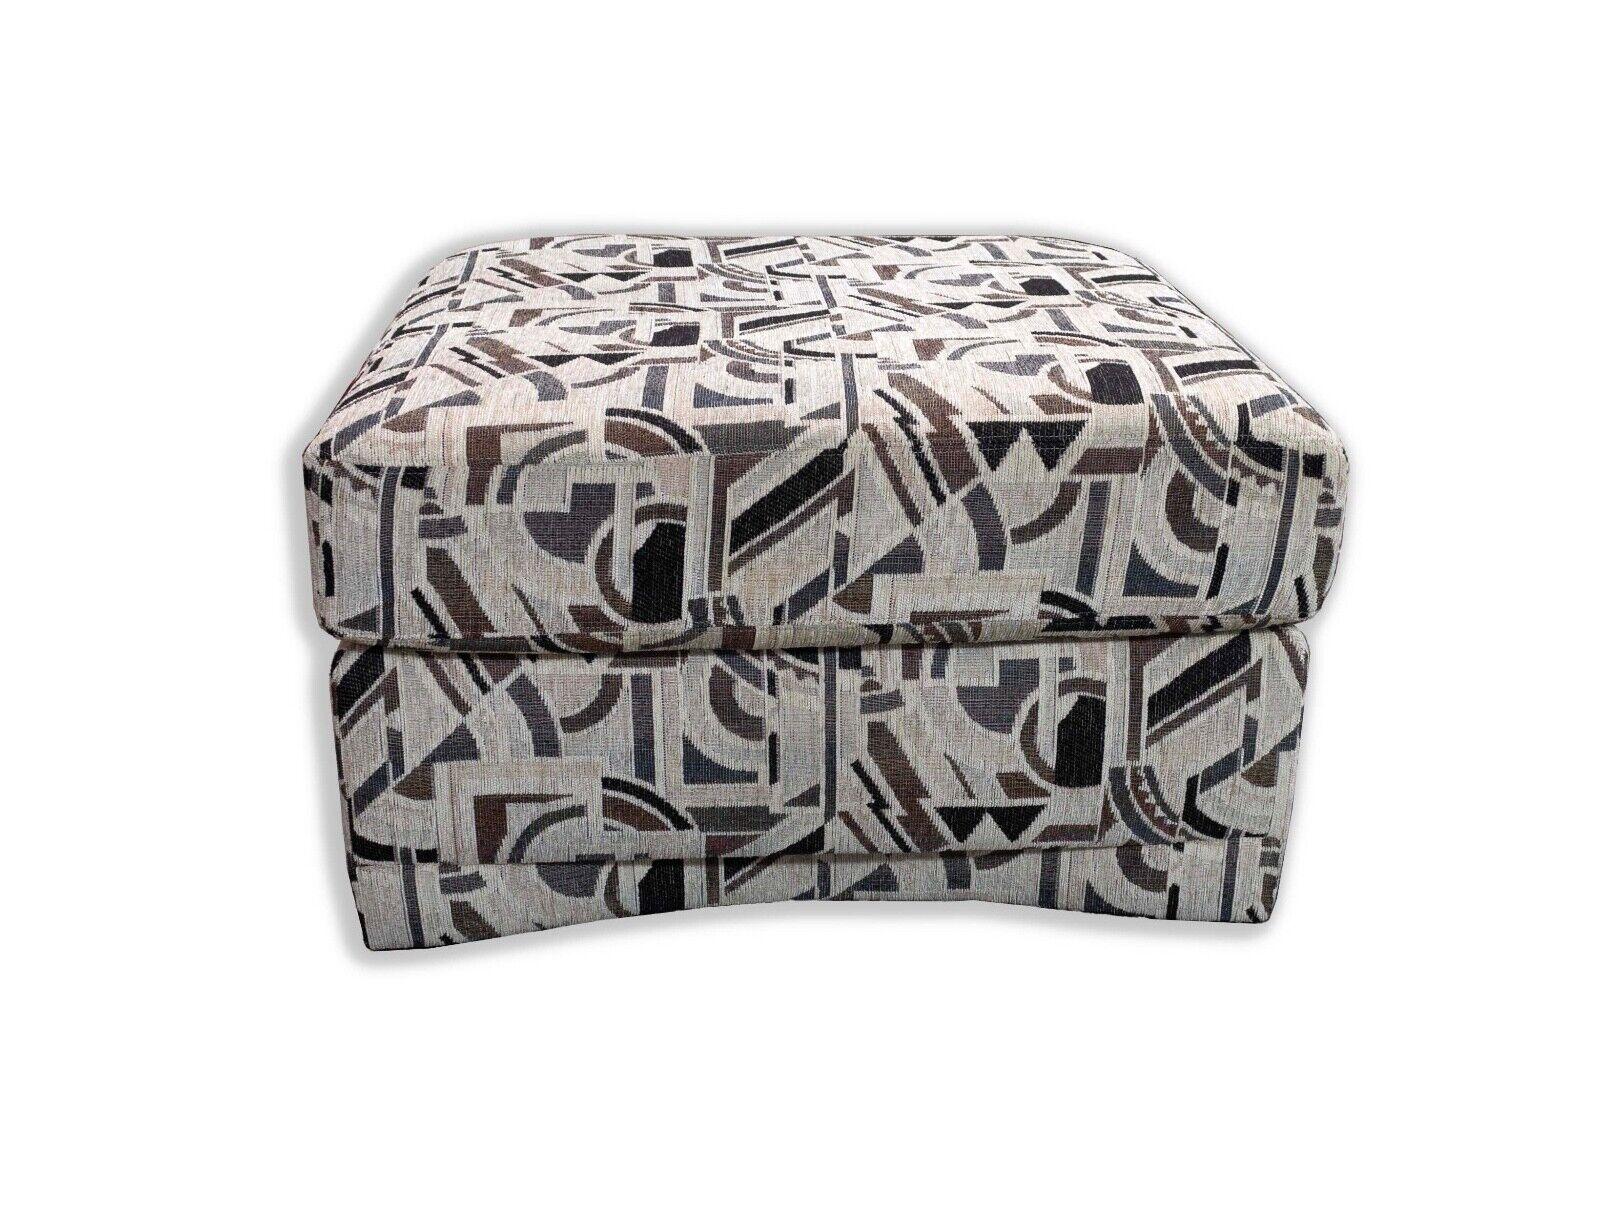 Preview Furniture Corporation Patterned Square Ottoman Contemporary Modern In Good Condition For Sale In Keego Harbor, MI